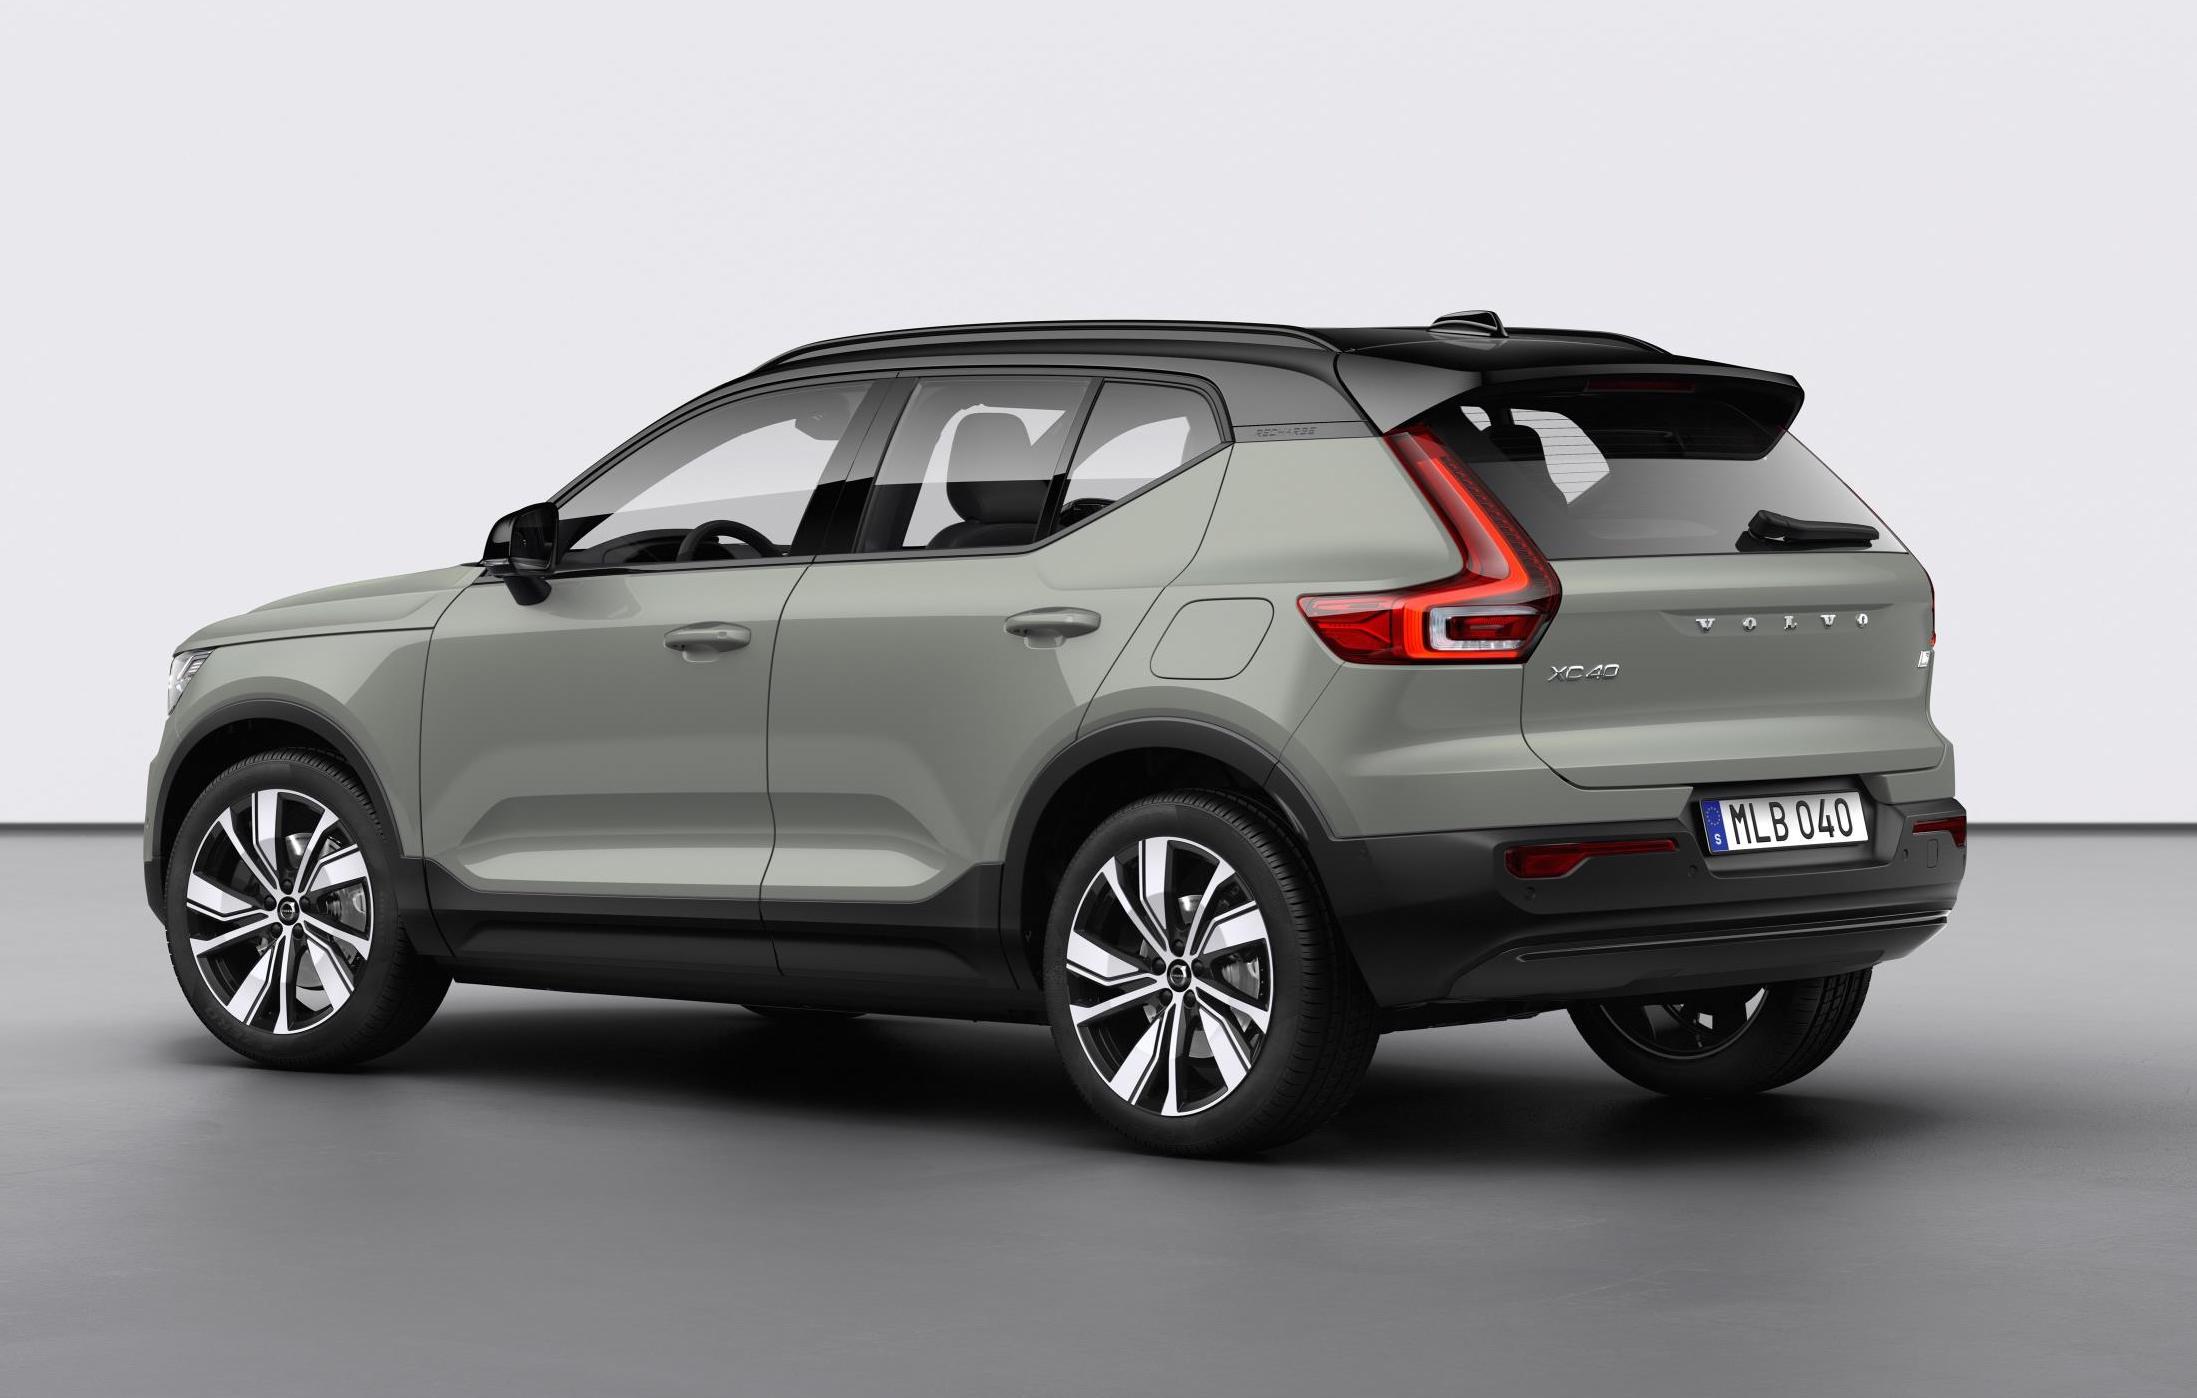 Volvo XC40 Recharge revealed, fully electric SUV PerformanceDrive